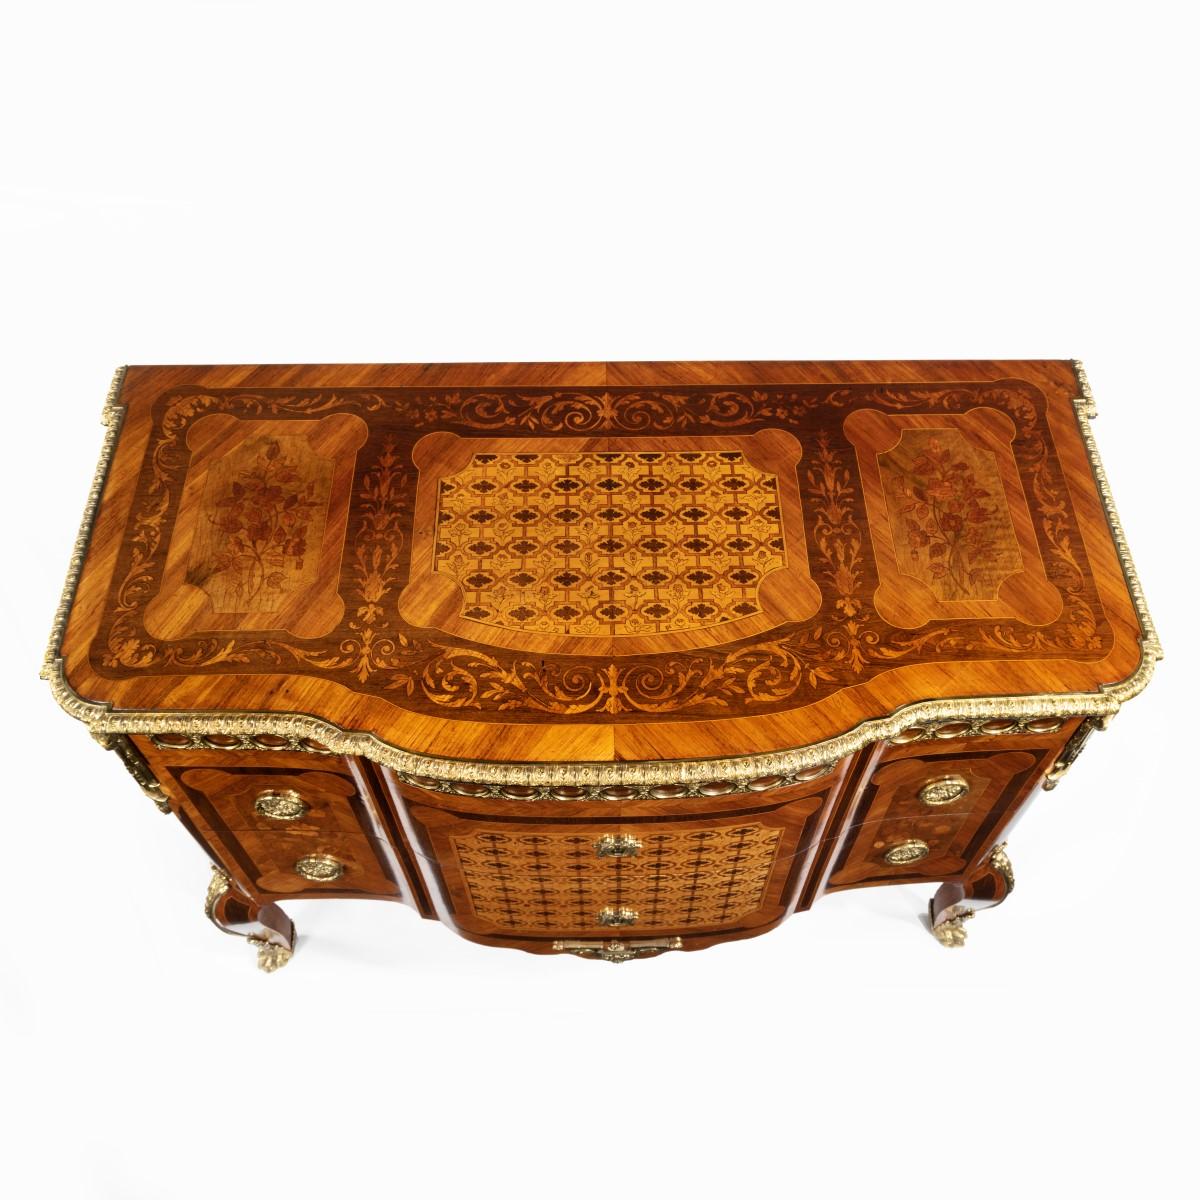 French kingwood marquetery commode